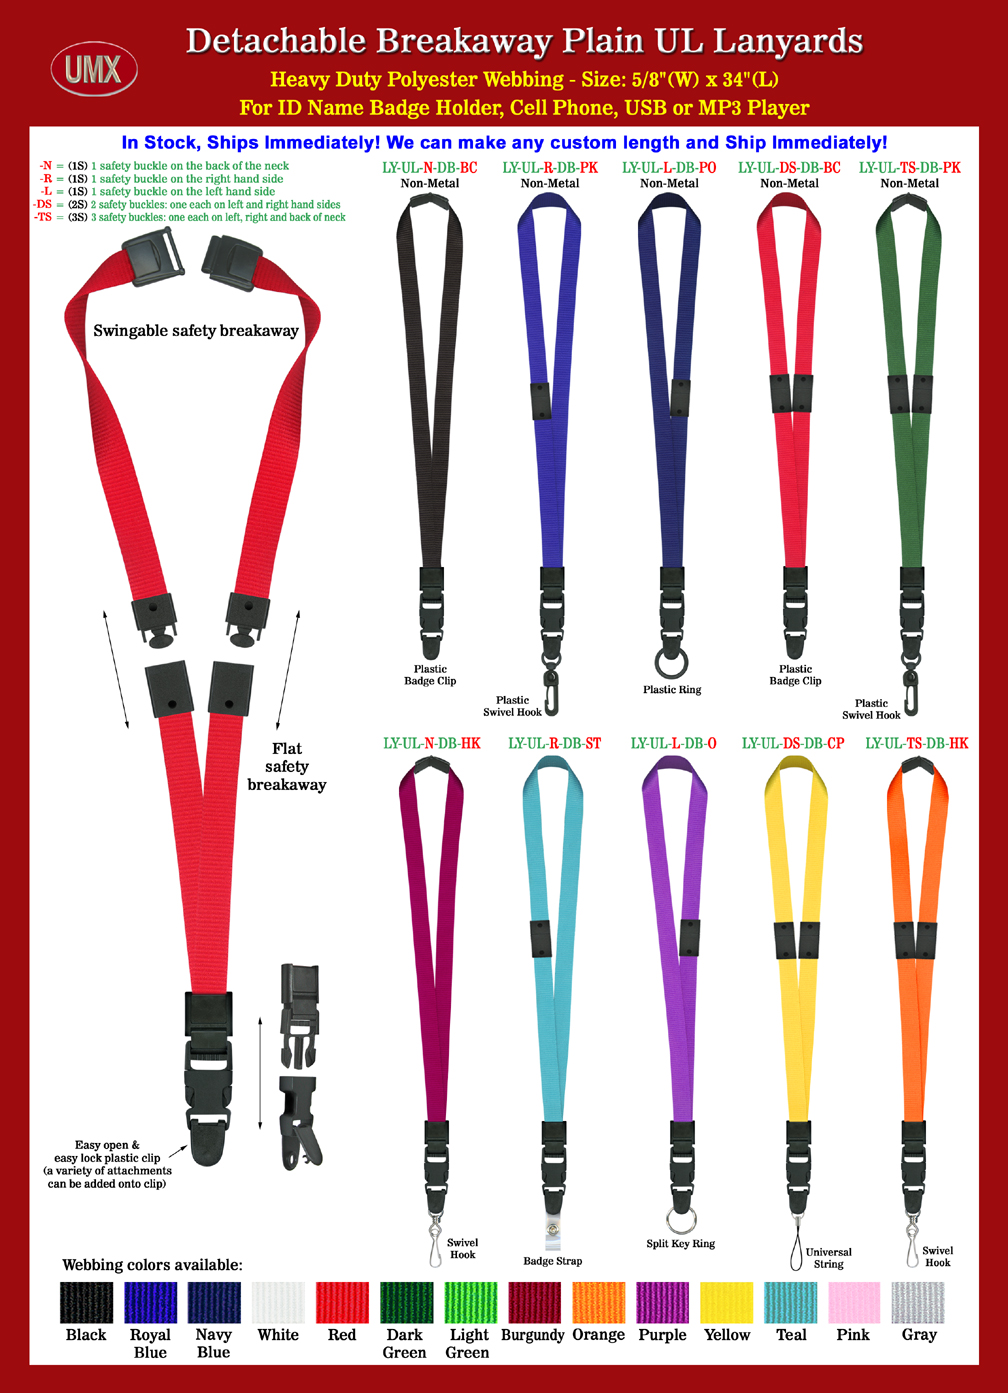 5/8" Multi-Safety + Quick Release Universal Link Plain Lanyards - With 13-Colors In Stock.